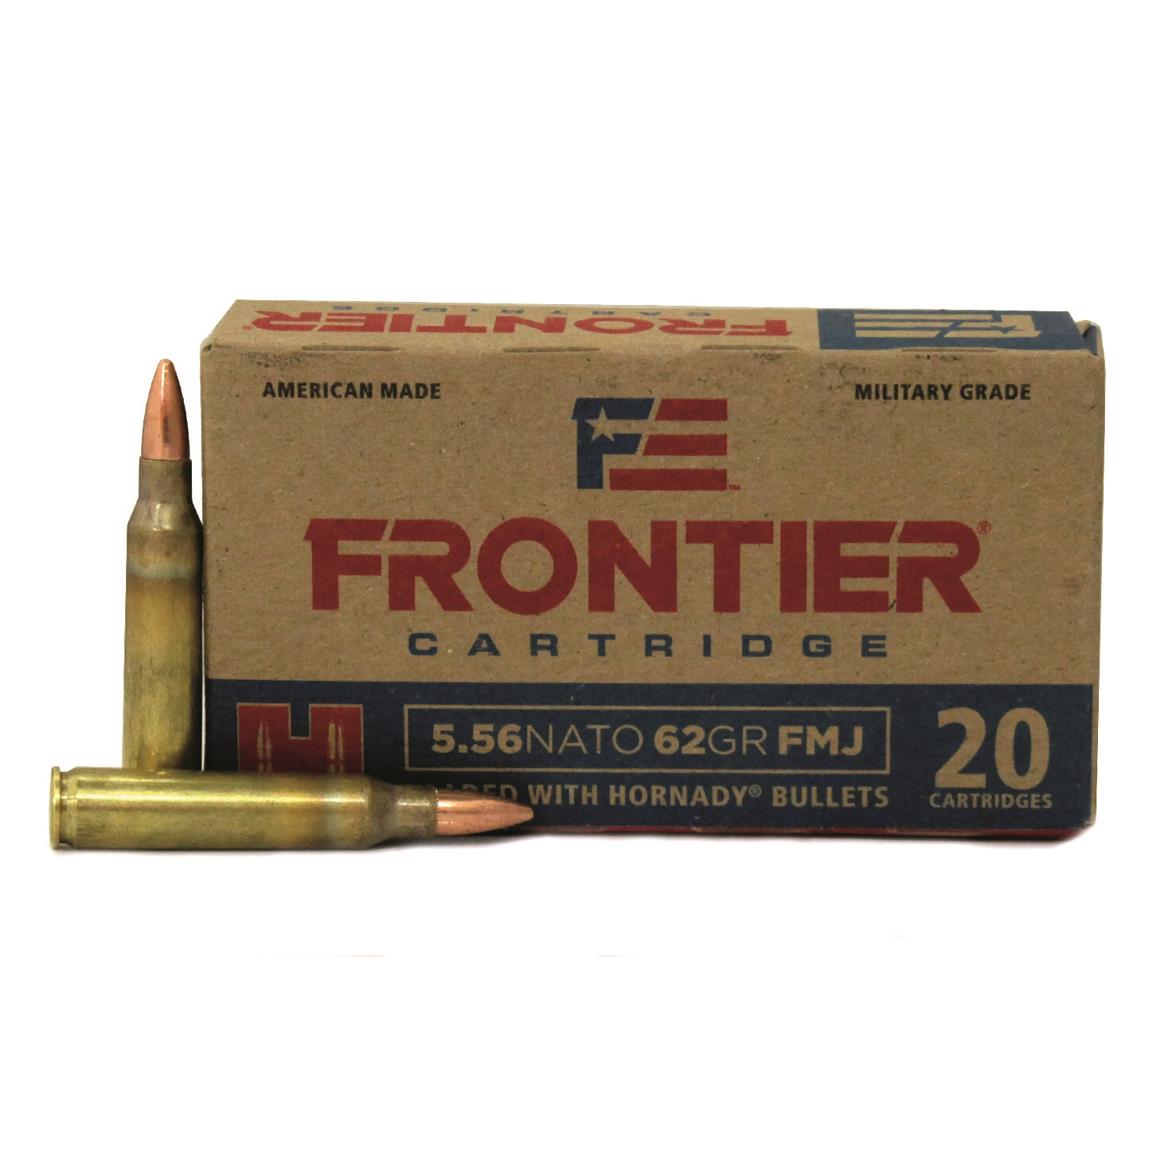 Hornady Frontier, 5.56x45mm NATO, FMJ, 62 Grain, 20 Rounds